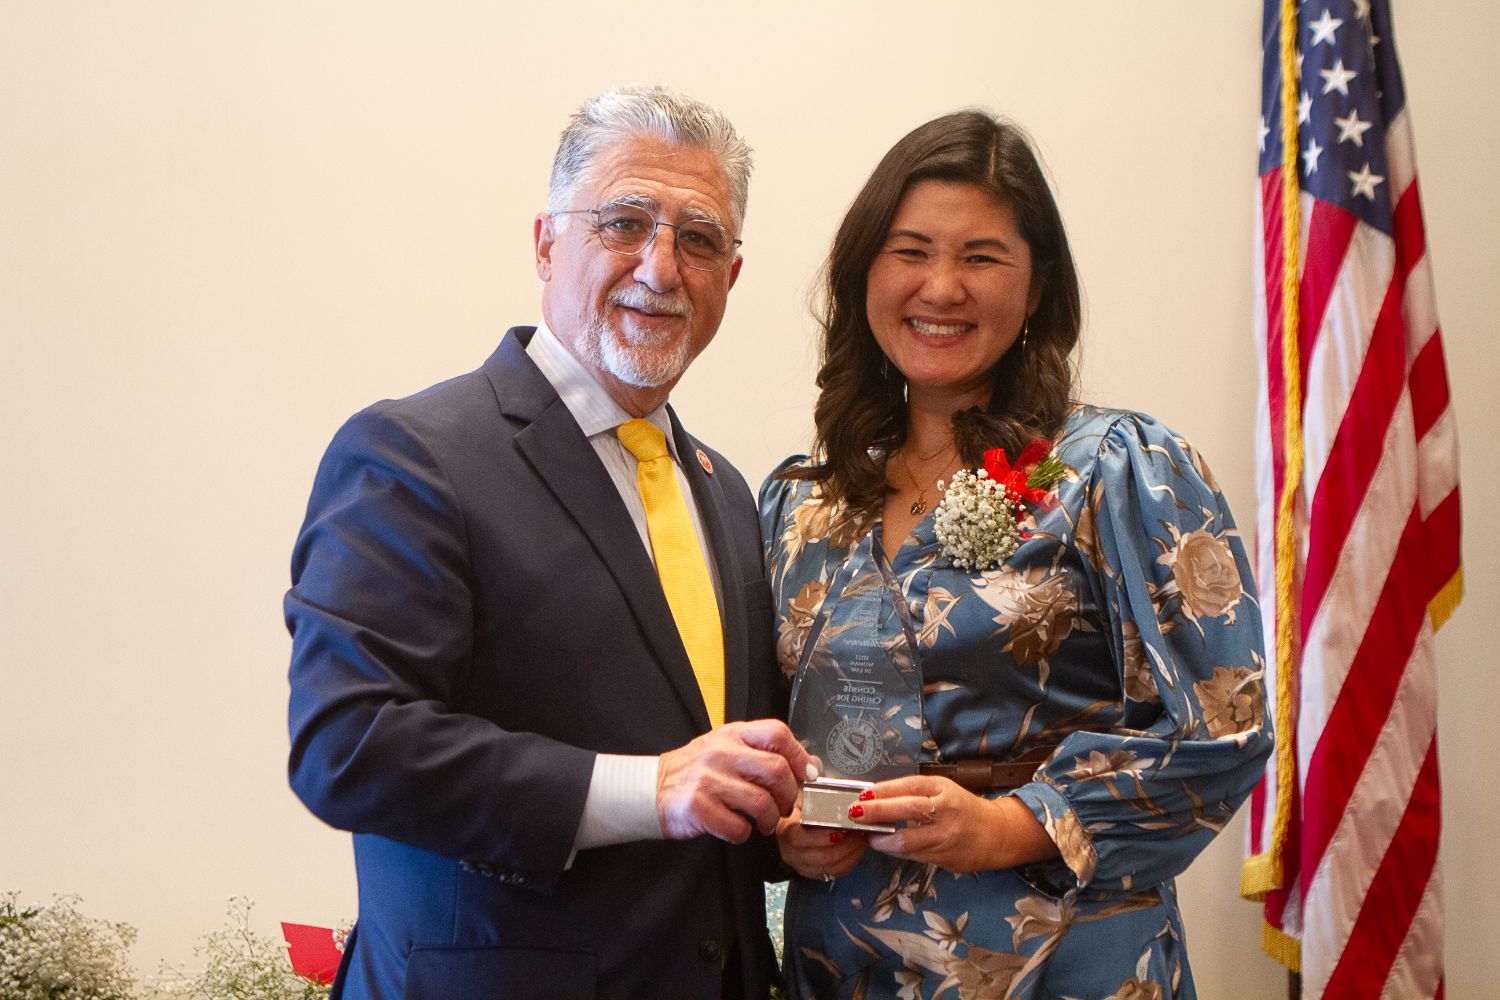 PHOTO: David Lohr | The South Pasadenan | Connie Chung Joe was presented with Senator Anthony J. Portantino's Women in Business Award in the law category.